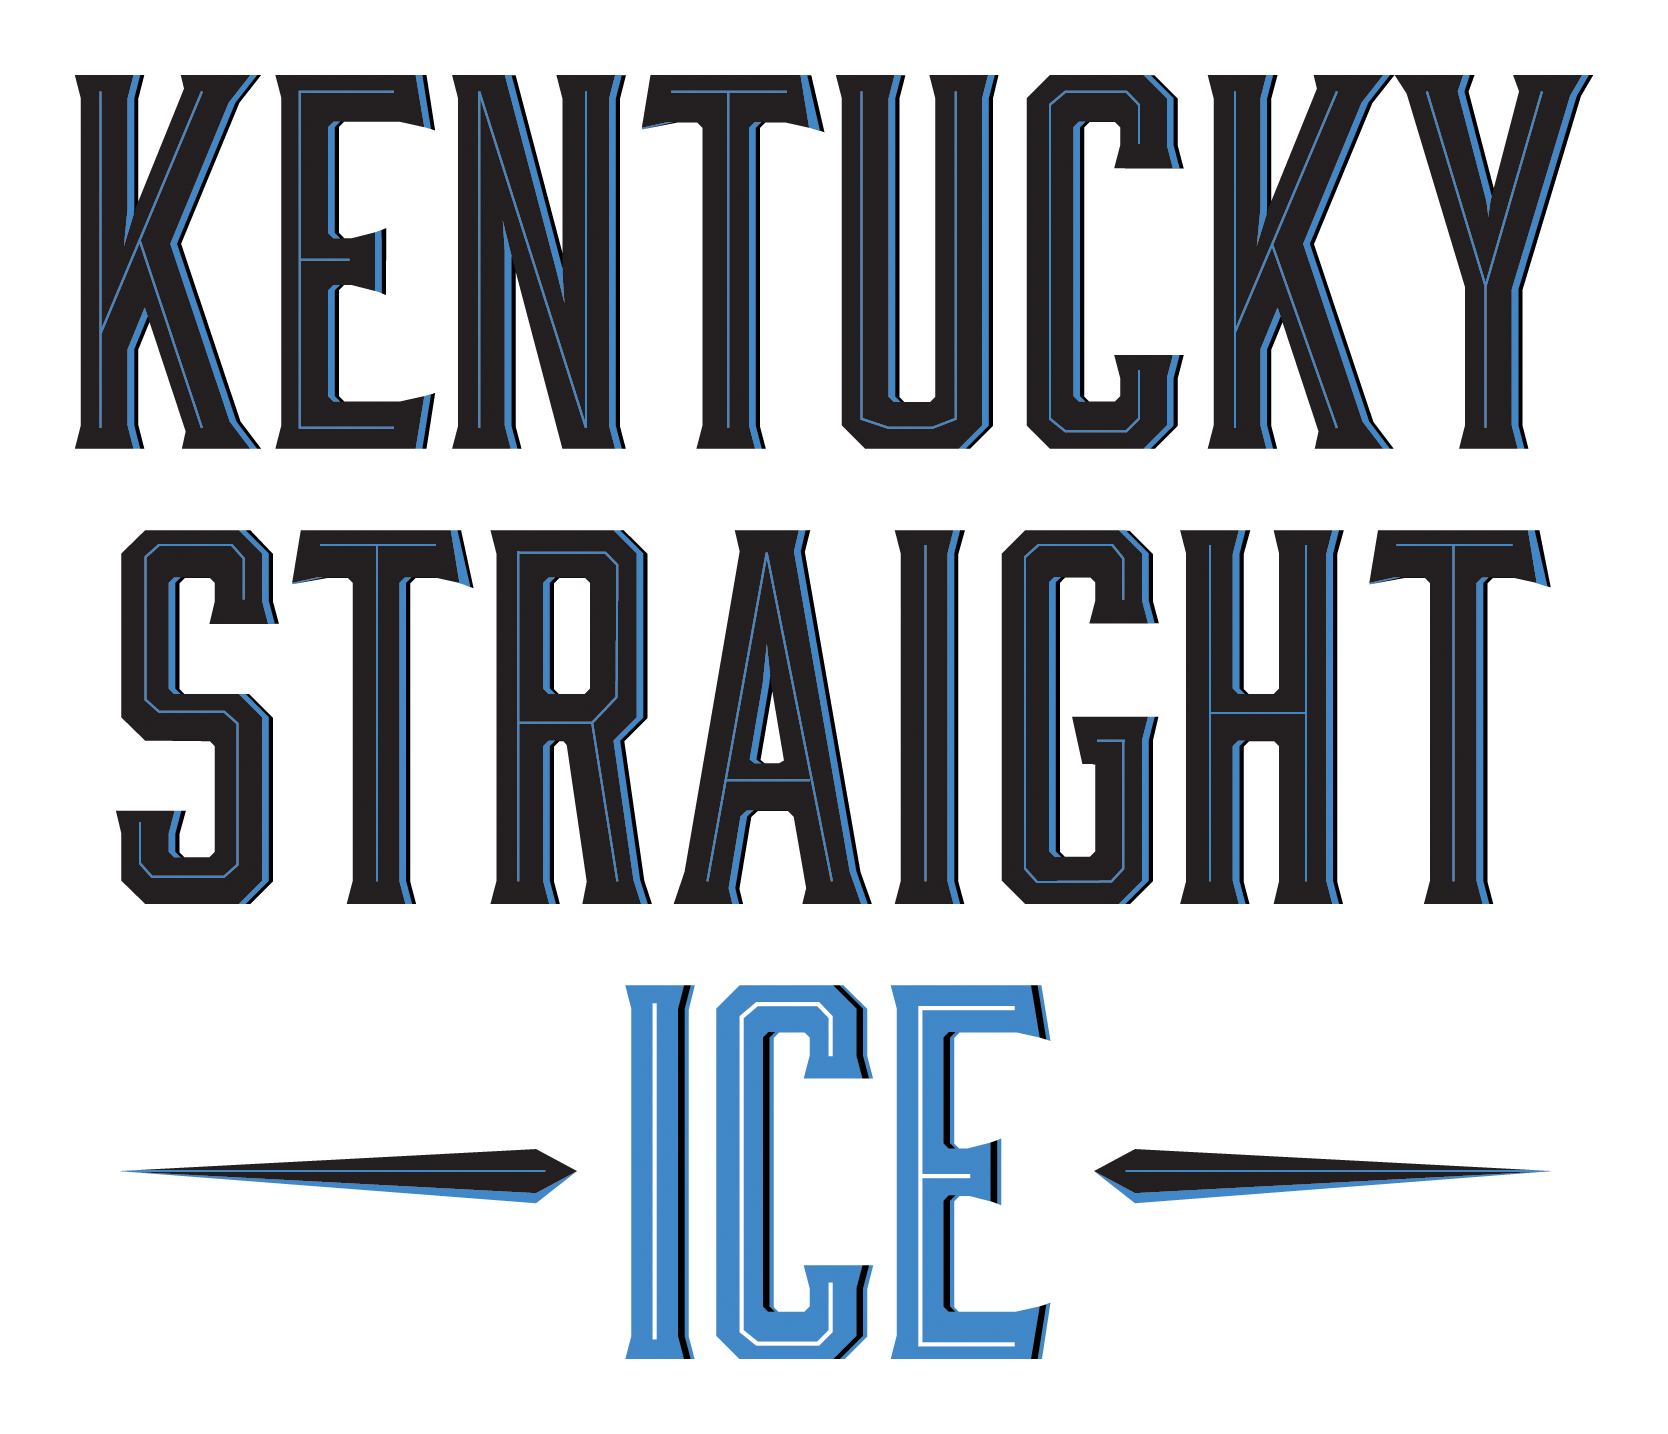 https://www.bourbonclassic.com/wp-content/uploads/2021/10/Kentucky-Straight-Ice-Logo-for-print.png